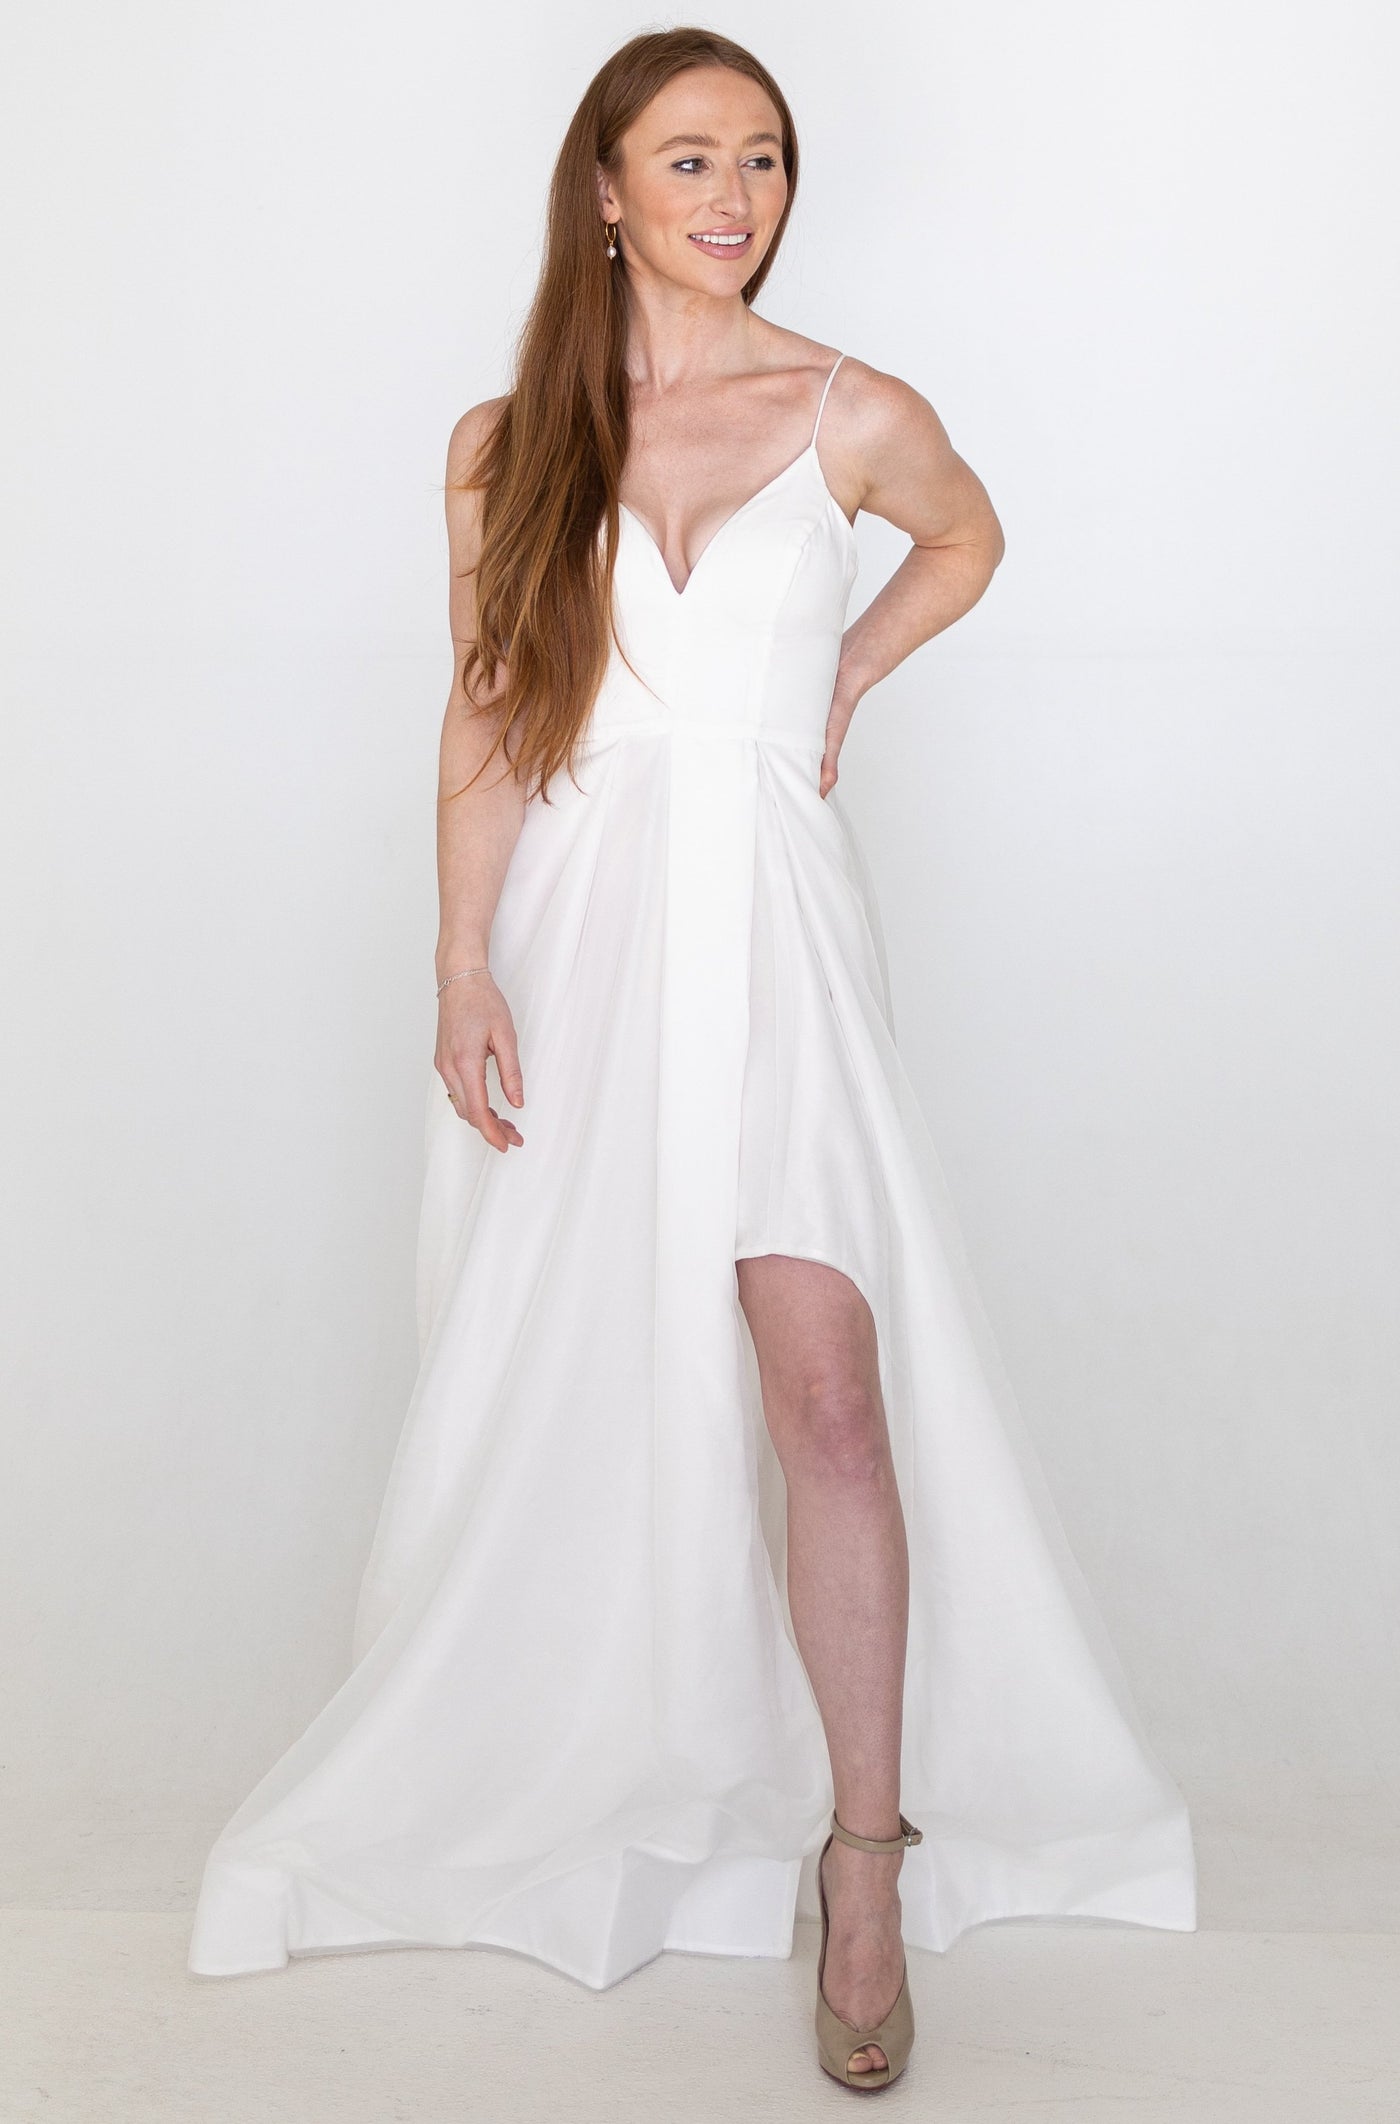 Wedding Gown by Bariano